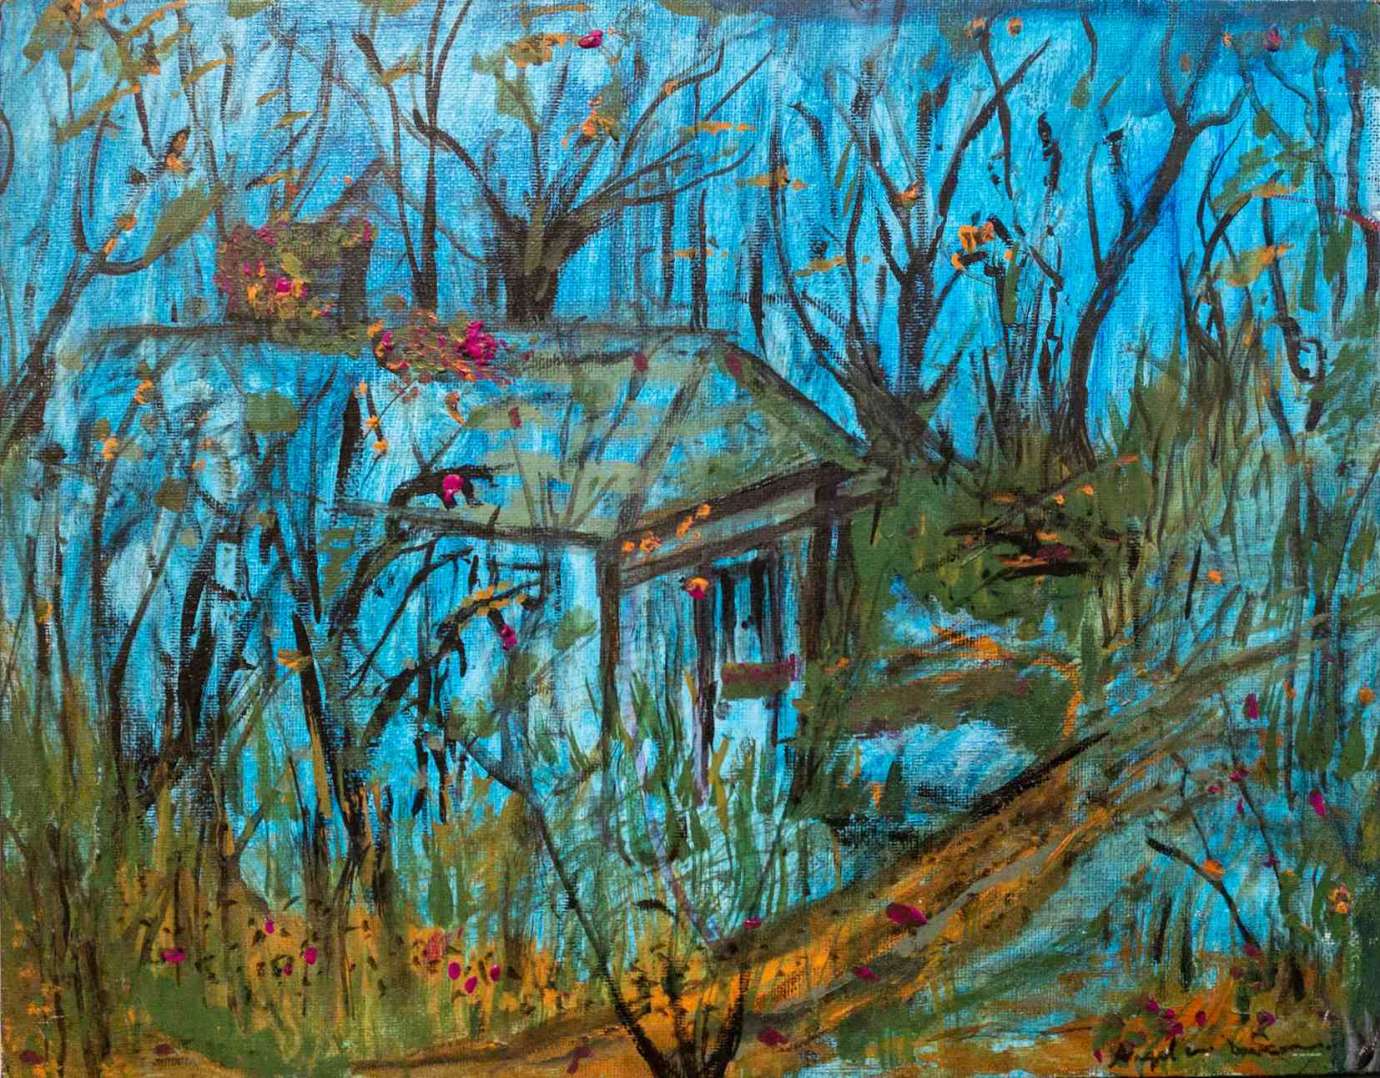 Blue house surrounded by trees with thin branches and few leaves